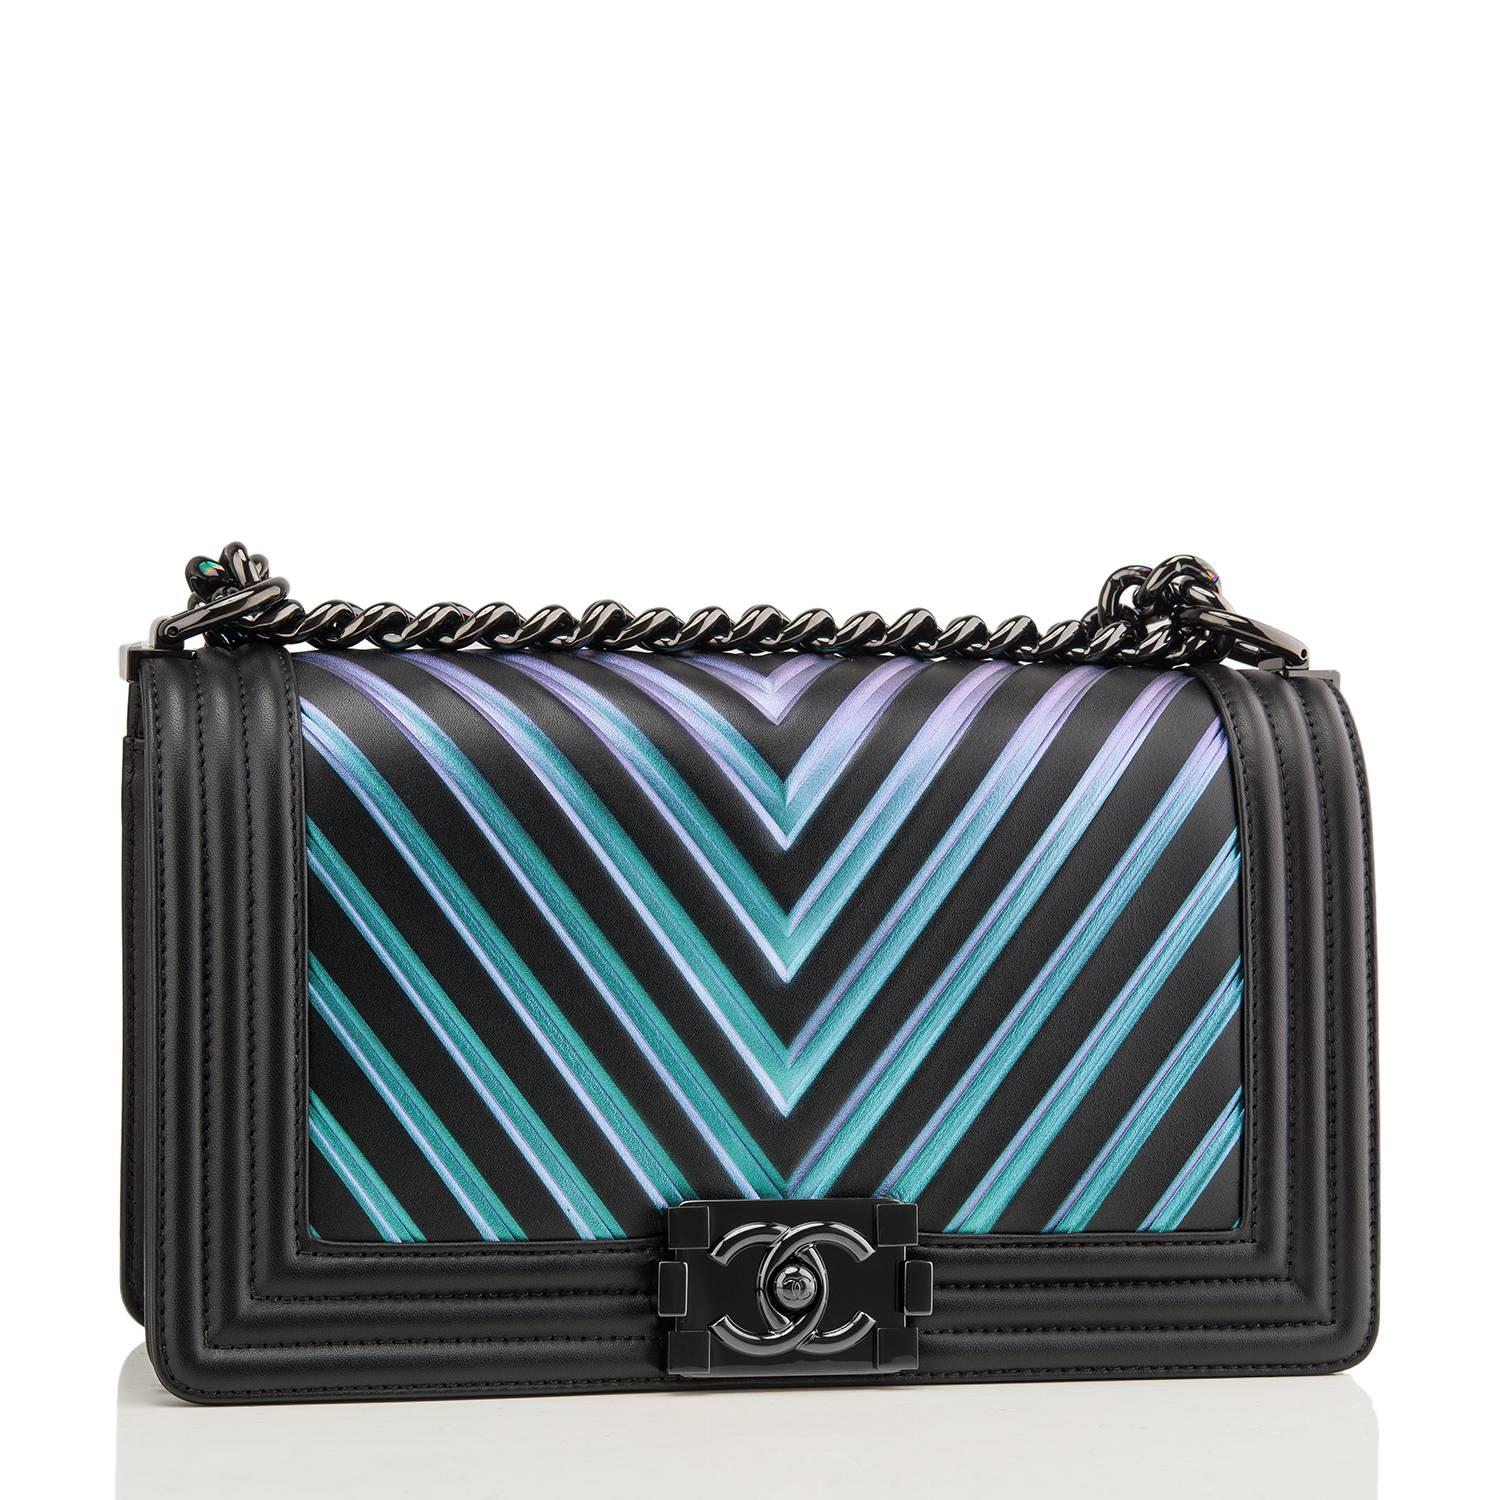 Chanel Old Medium Boy bag of black calfskin leather with multicolor iridescent painted and embossed chevron pattern and black hardware.

This limited edition Chanel bag is in the classic Boy style with unique multicolored iridescent front and back,